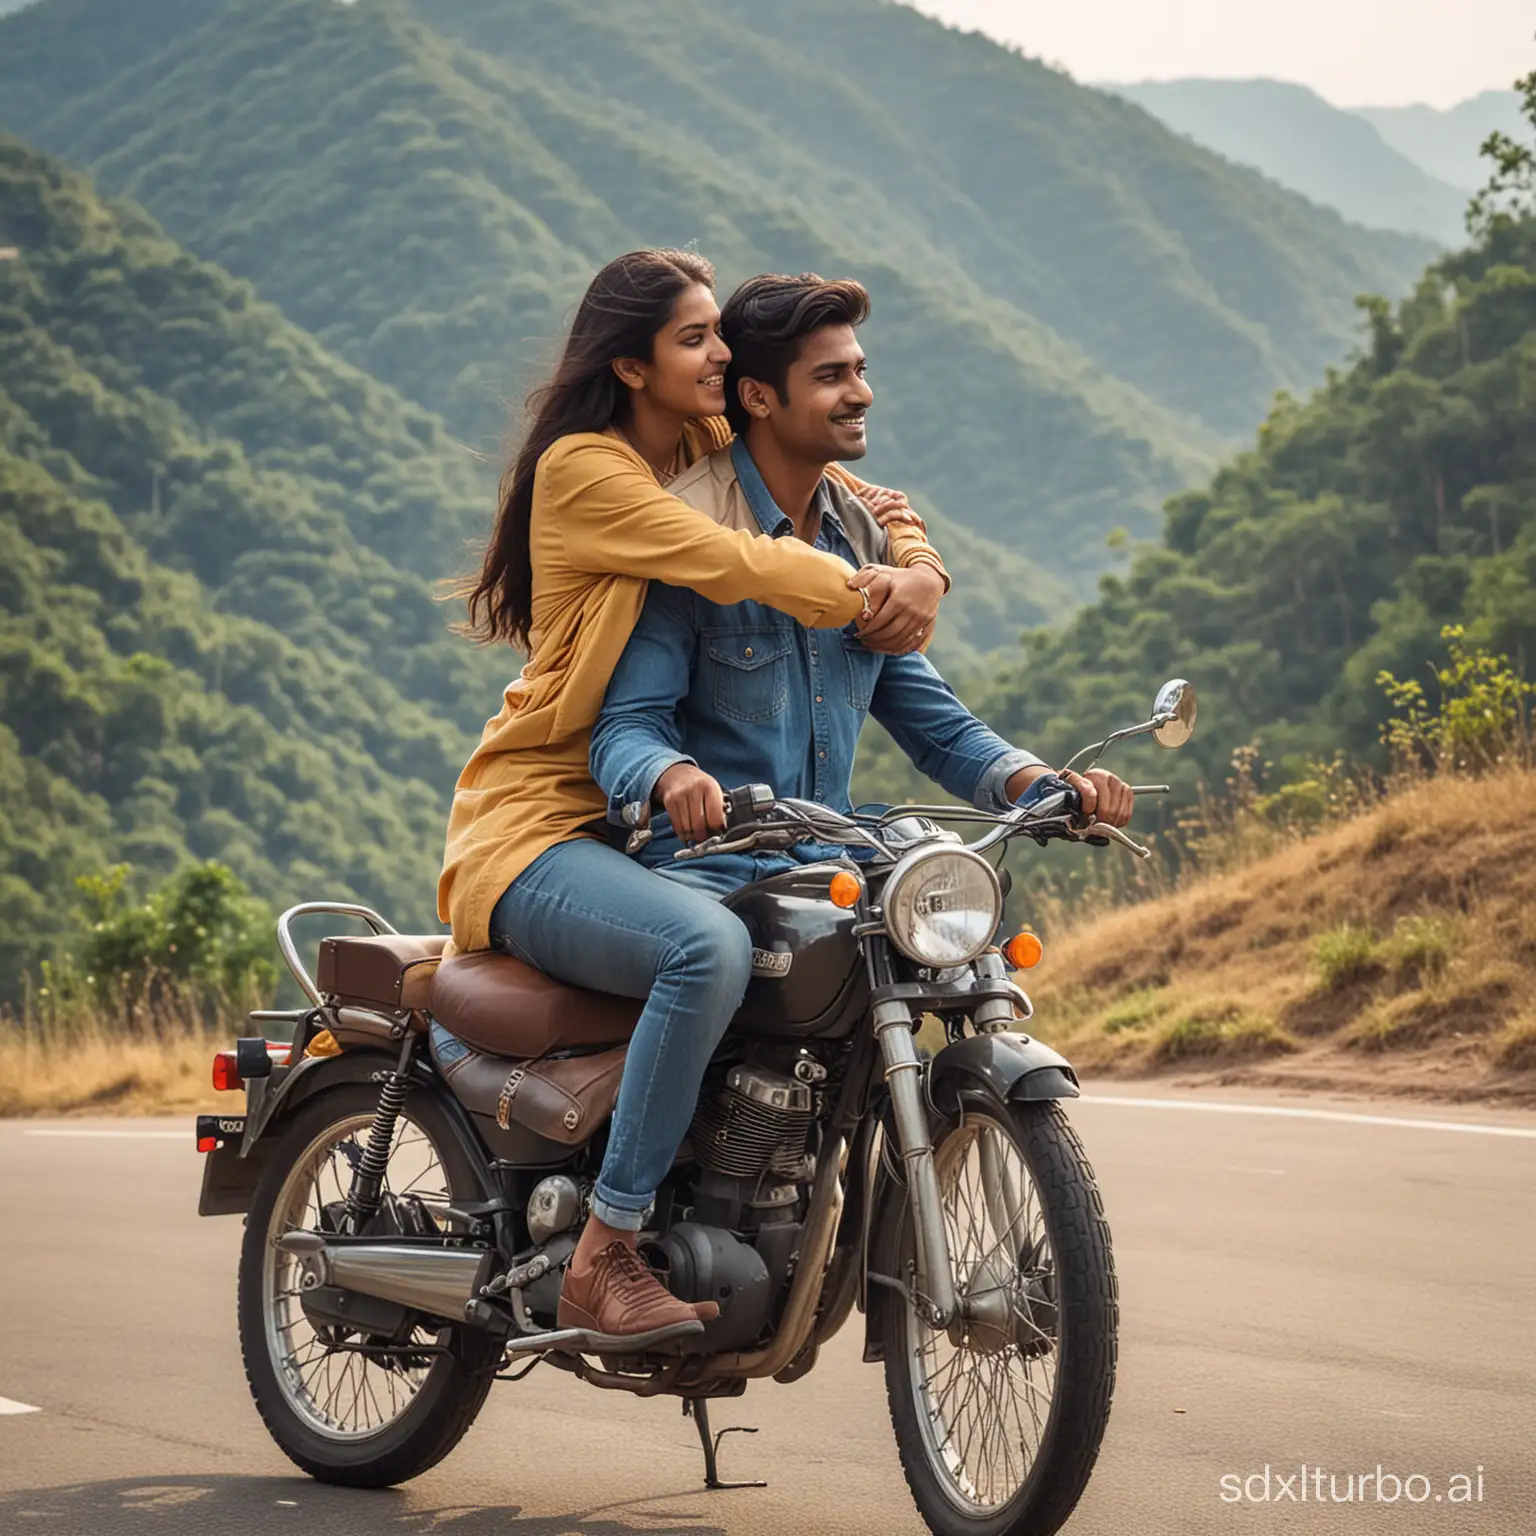 young indian couple travelling in bike at hill station road. lady is ditting back seat and hugging the man who is riding bike